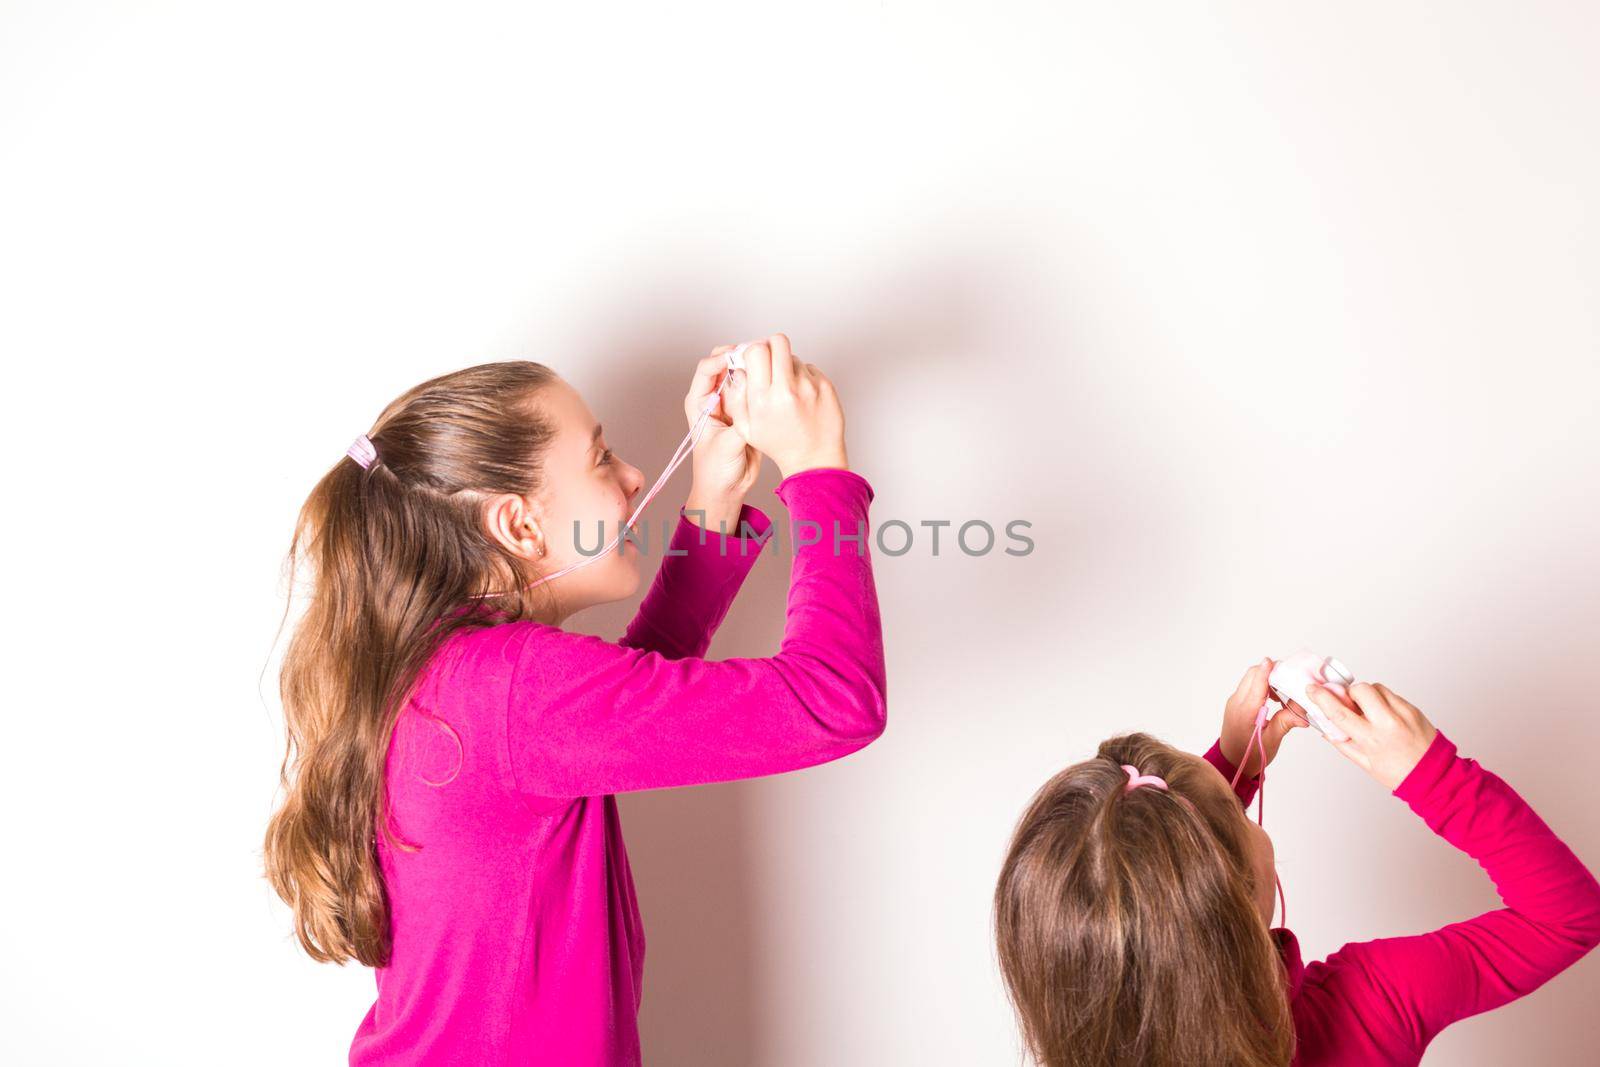 Couple of Little Girls Taking Picture Using Toy Photo Camera on white background by bepsimage